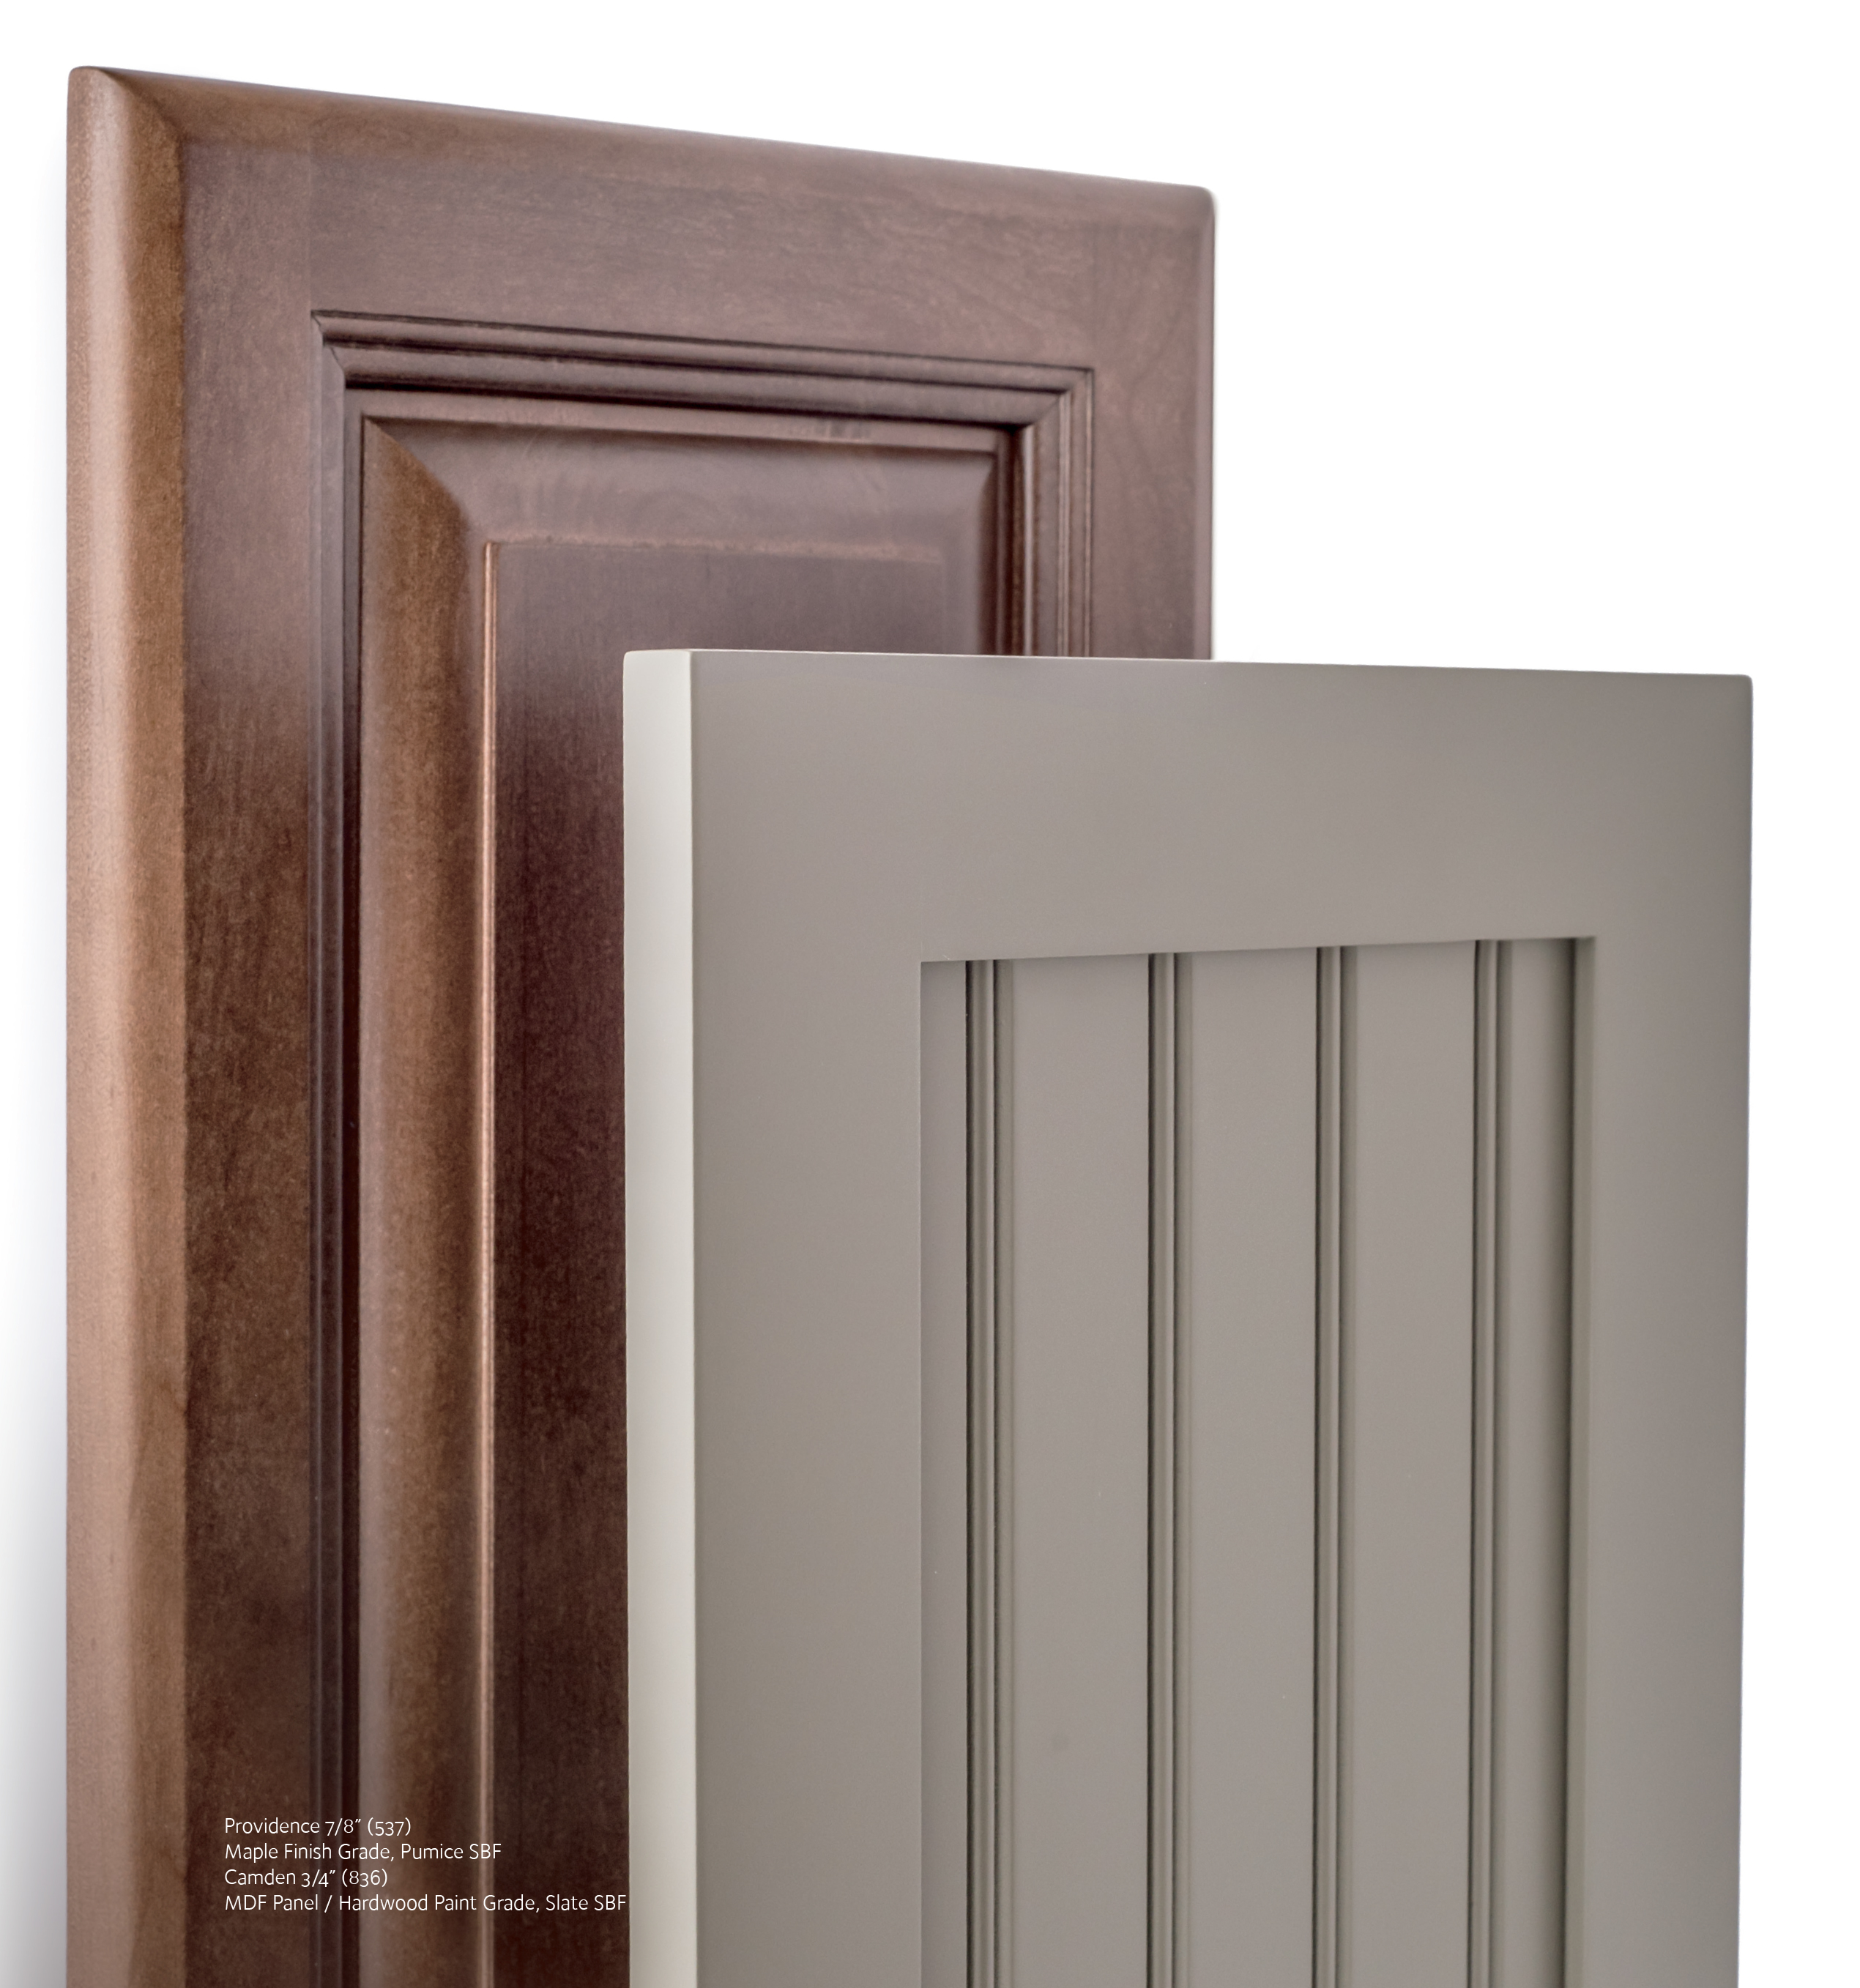 See Rta Cabinets On Display By Decore Ative Specialties At